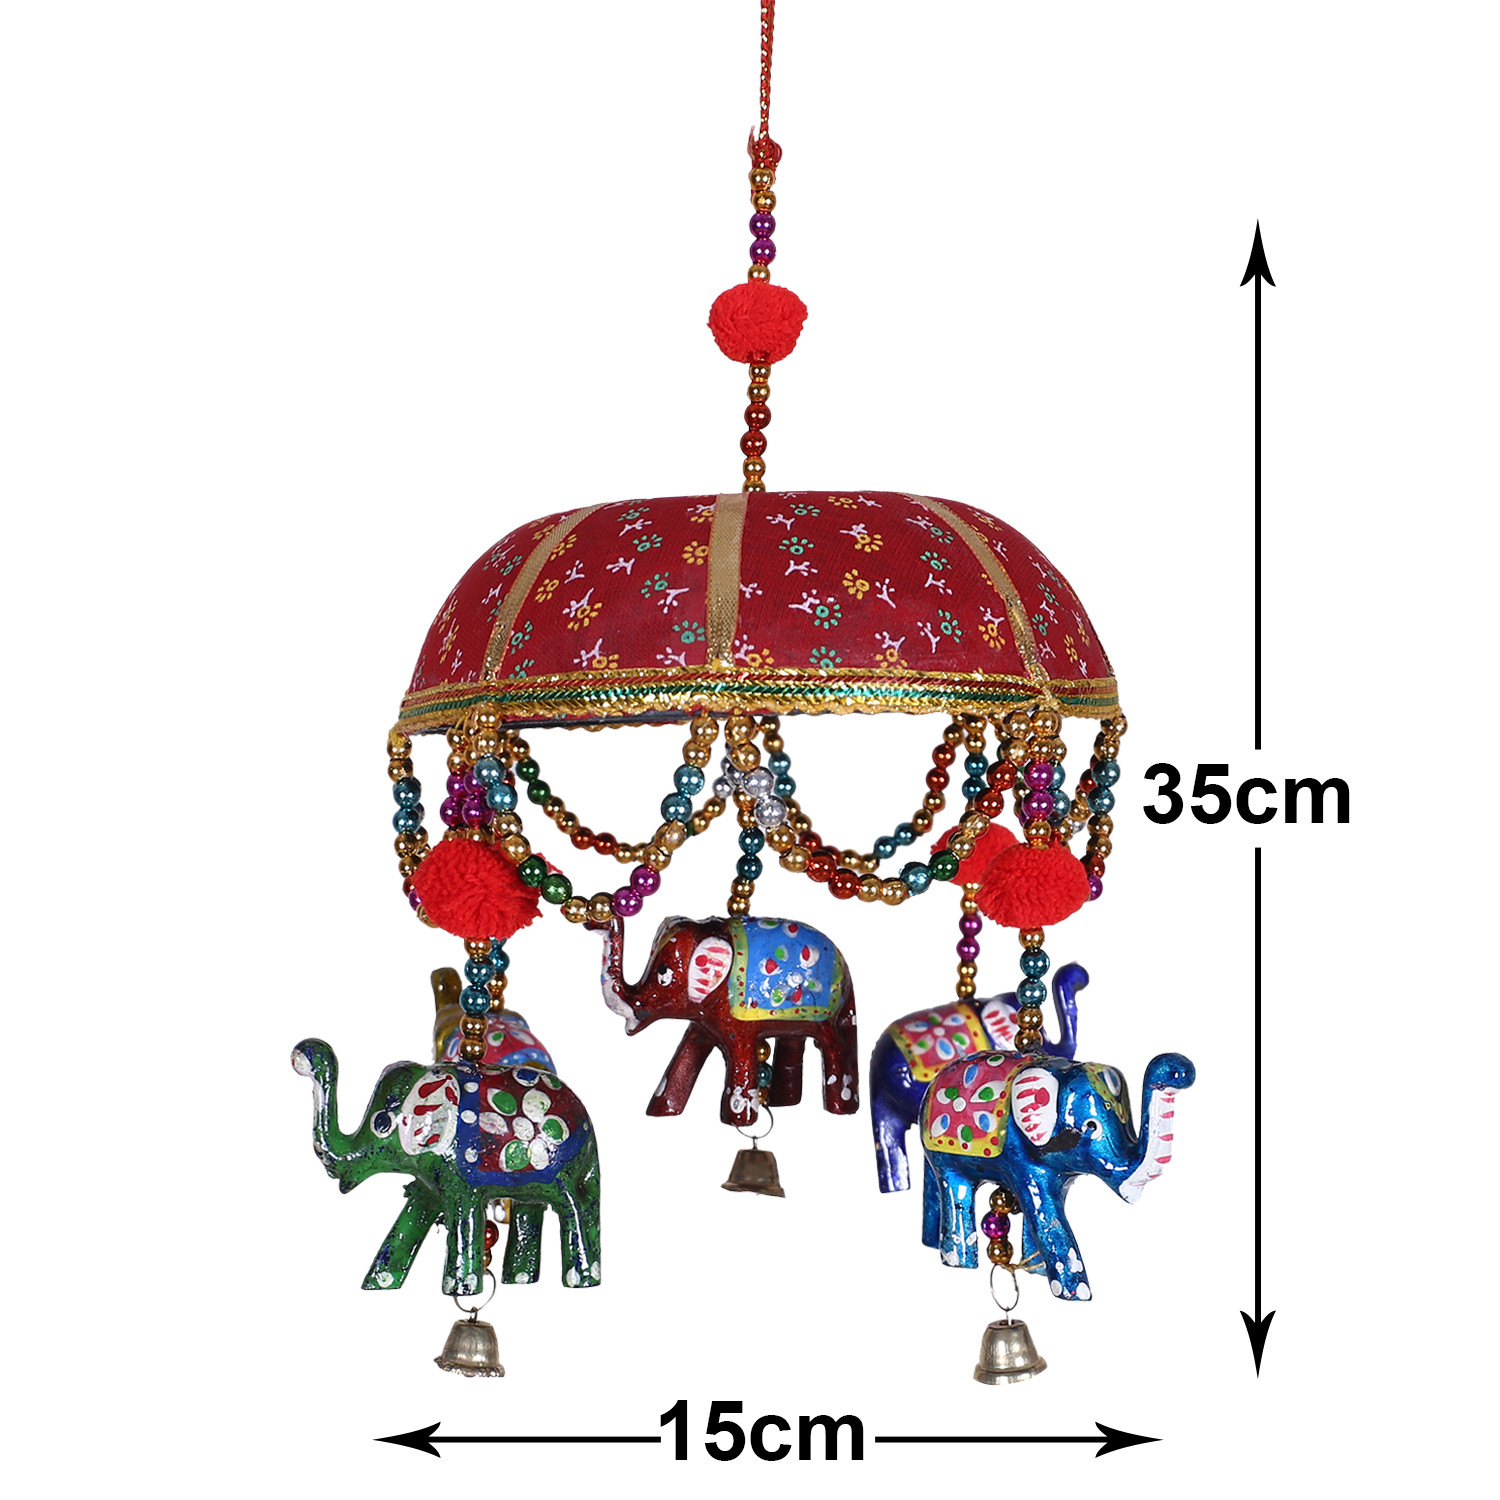 Kuber Industries Rajasthani Traditional Windchimes|Handcrafted Latkan|Toran With 5 Decorative Hanging Elephants (Red)